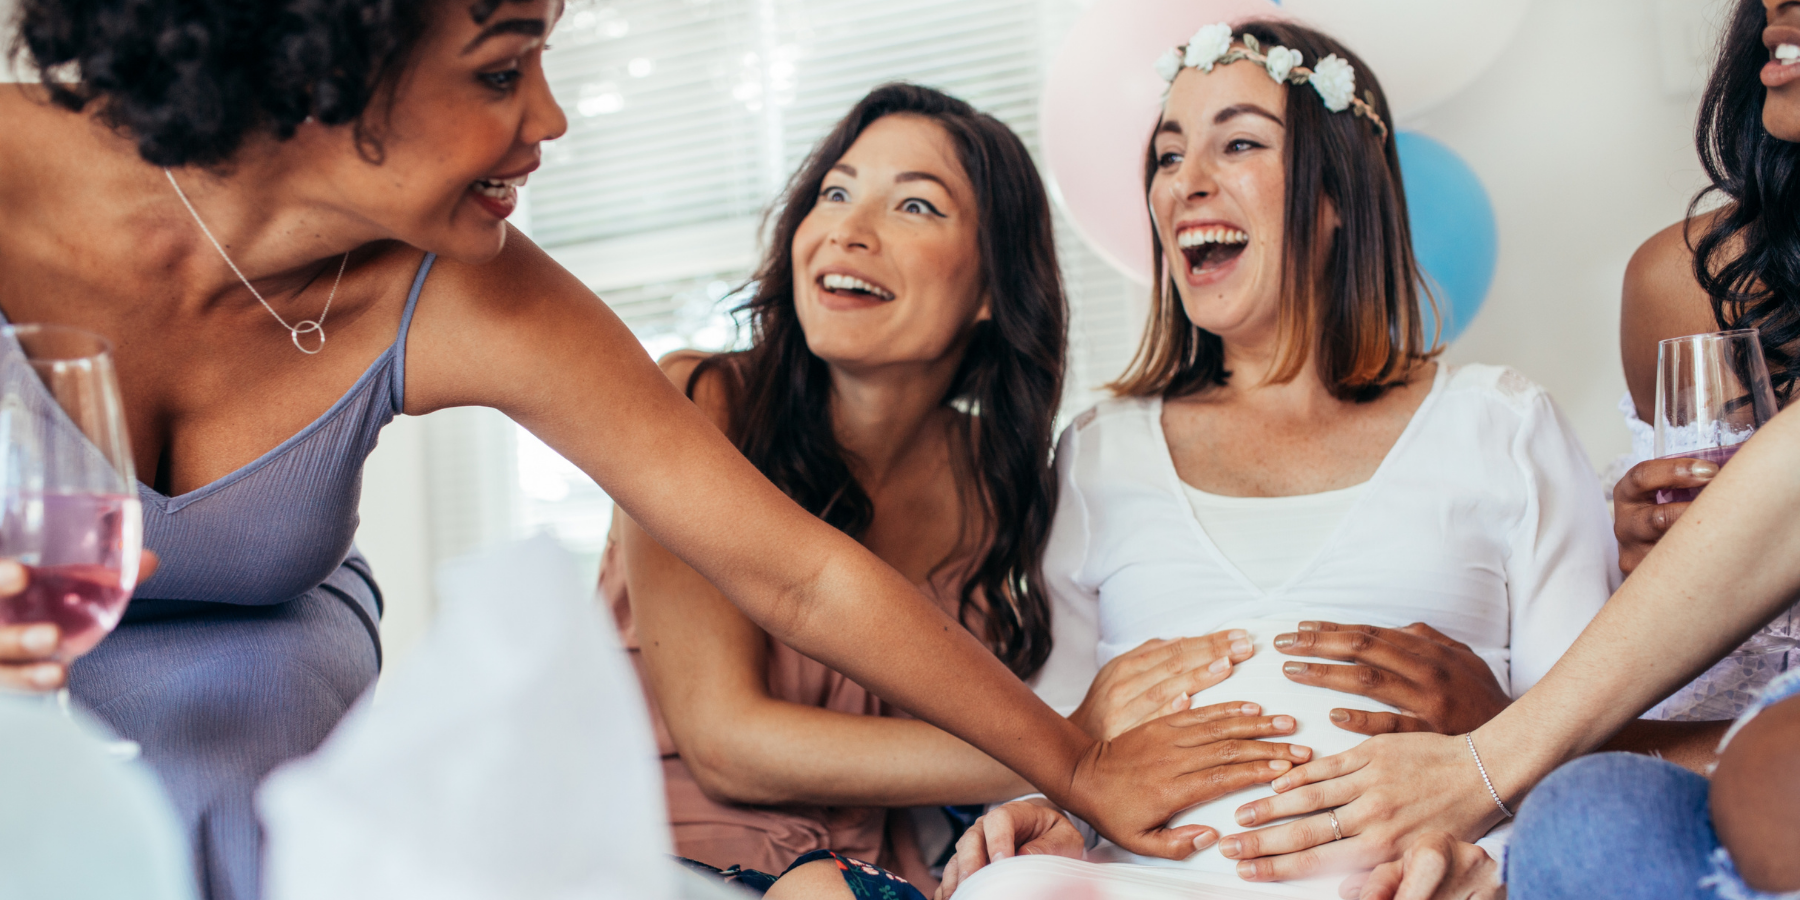 Friends with their hands on a pregnant woman's stomach